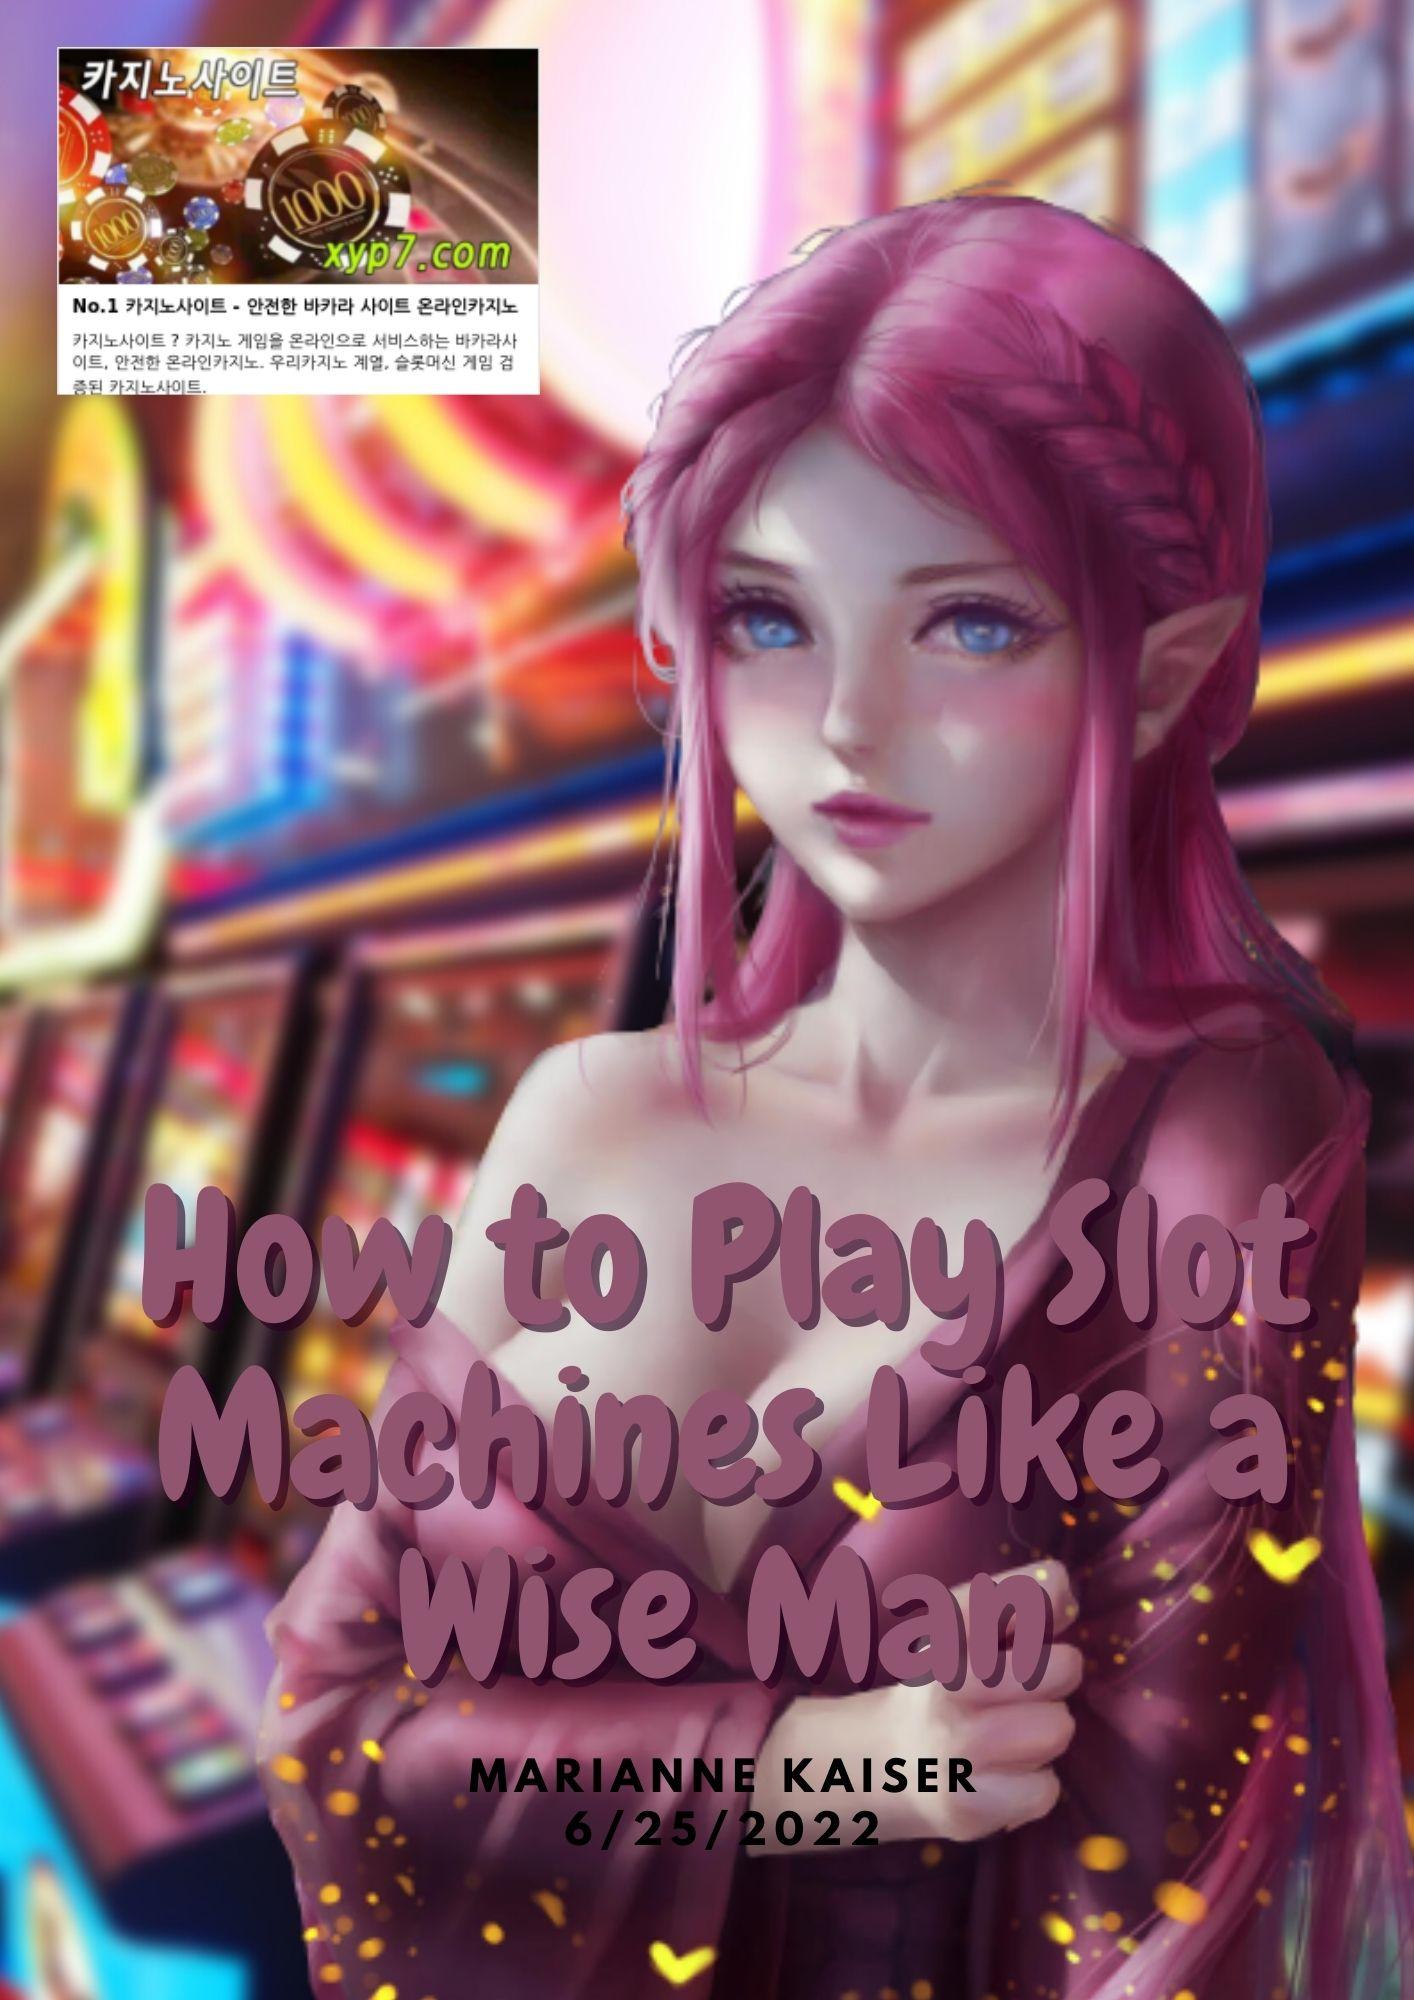 How to Play Slot Machines Like a Wise Man